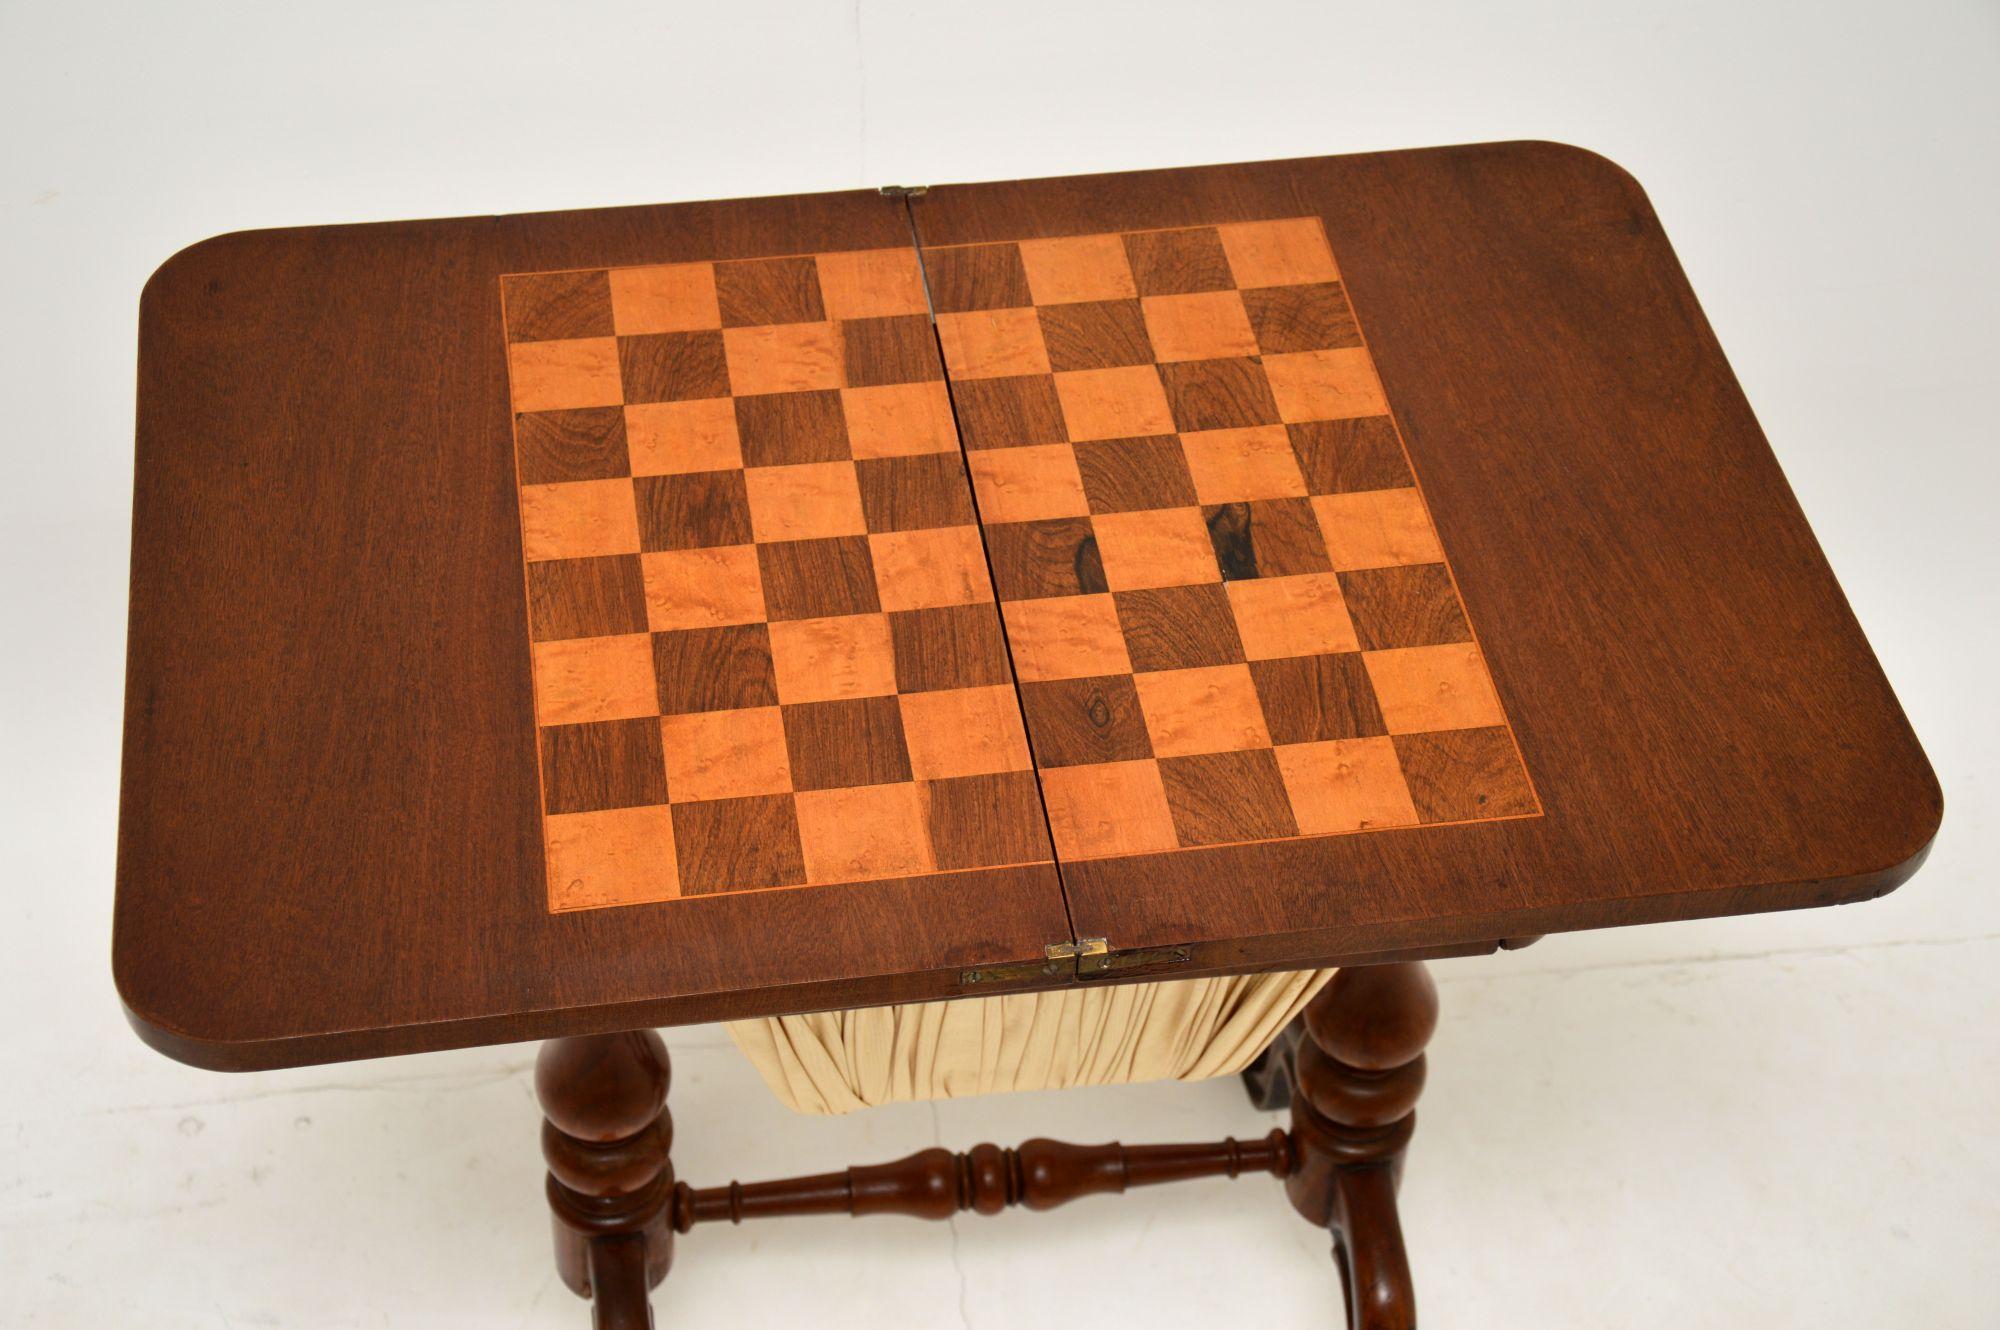 English Antique Victorian Walnut Games / Chess Table